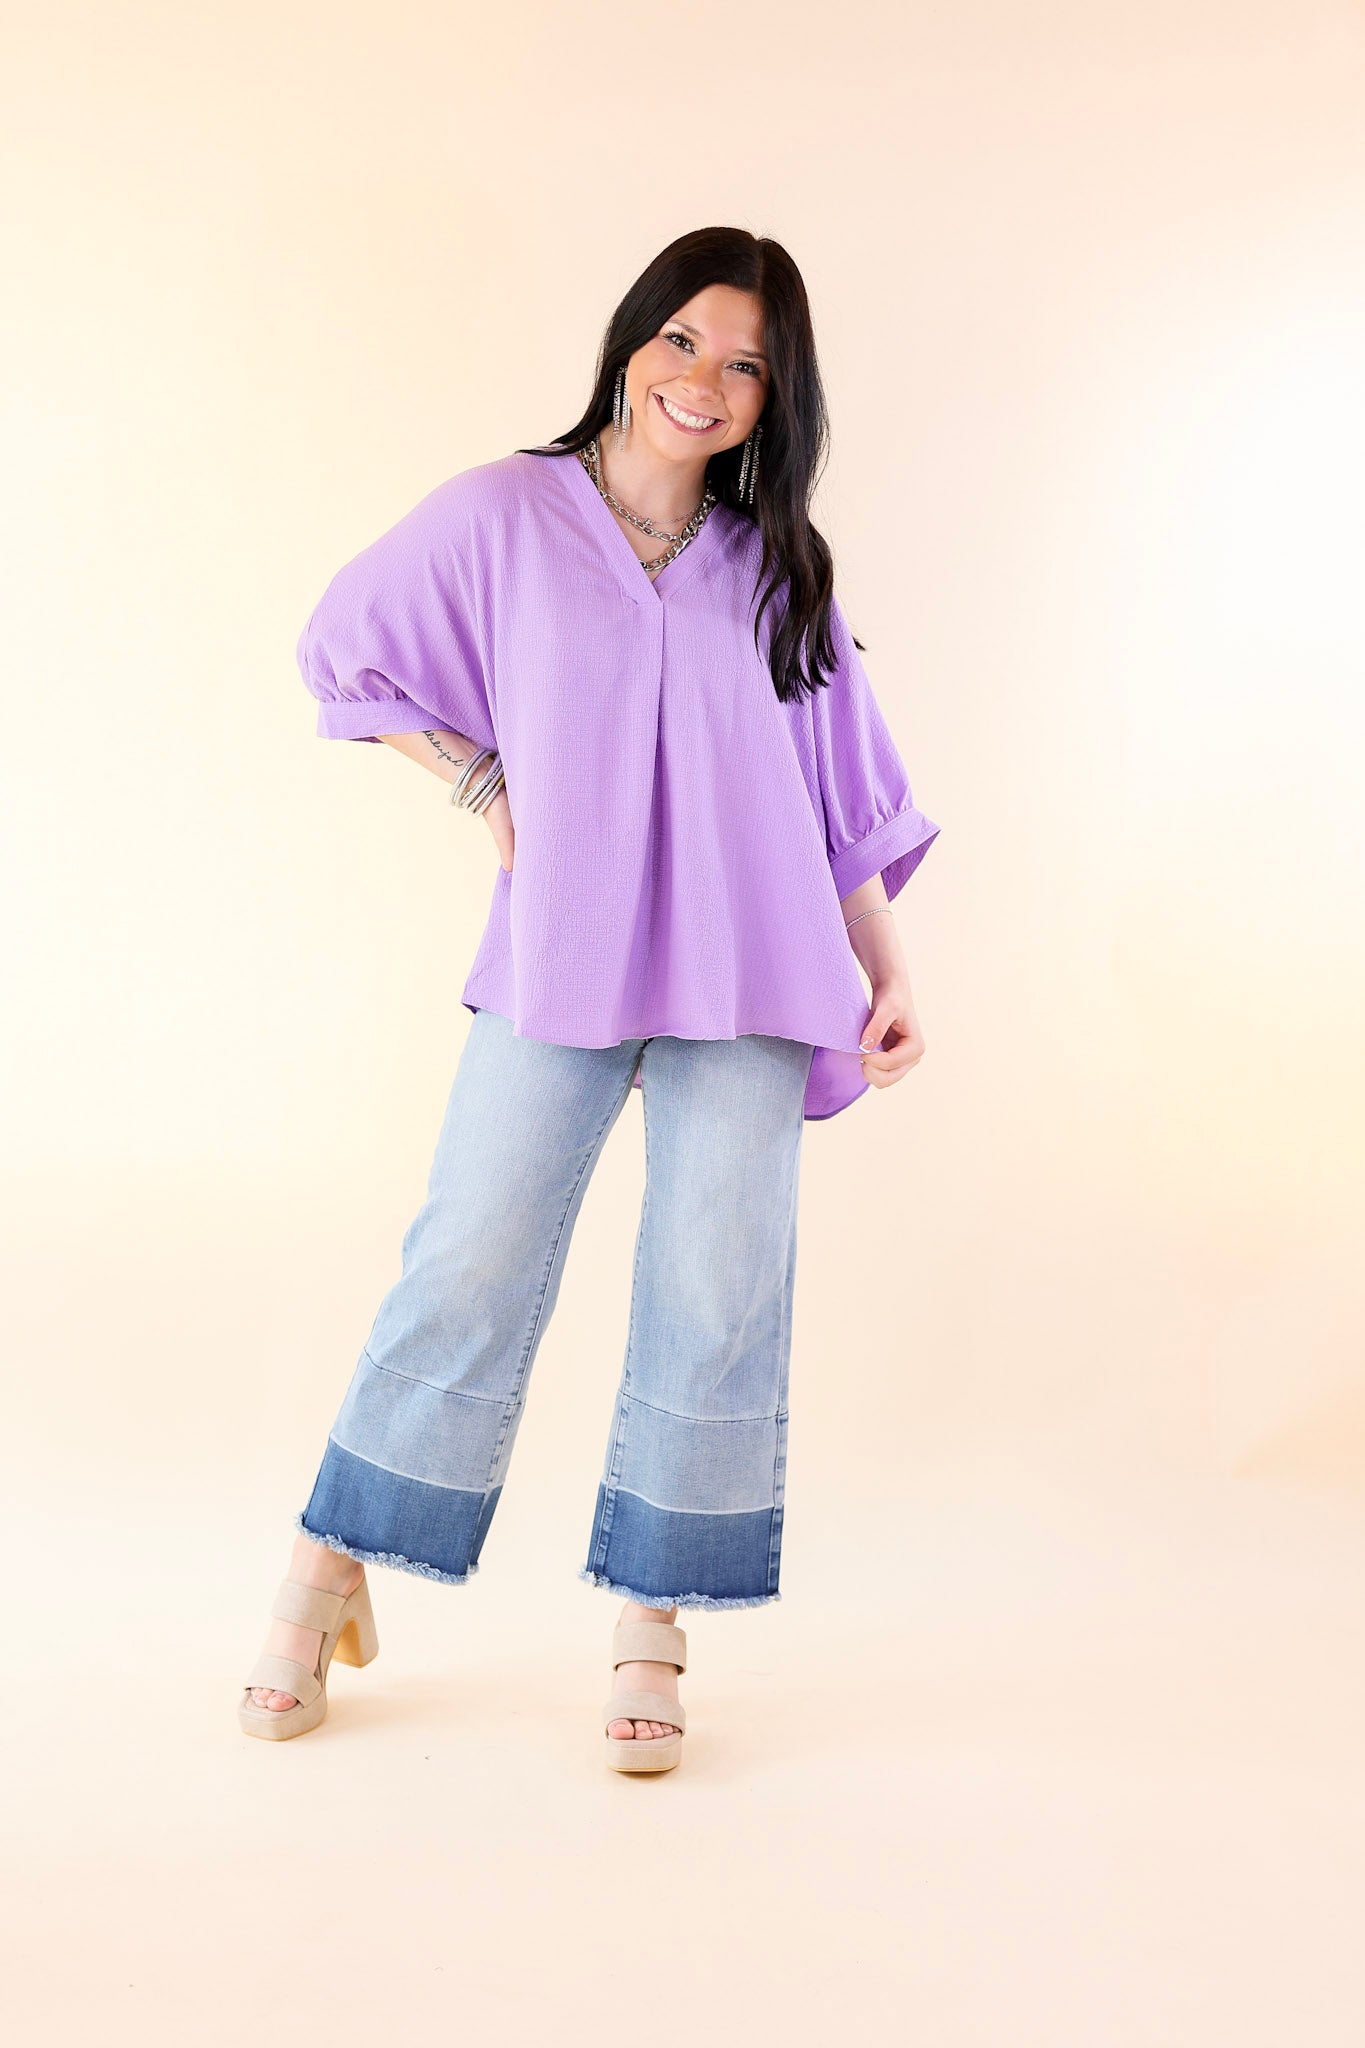 Chic and Charming V Neck Top with 3/4 Sleeves in Lavender Purple - Giddy Up Glamour Boutique